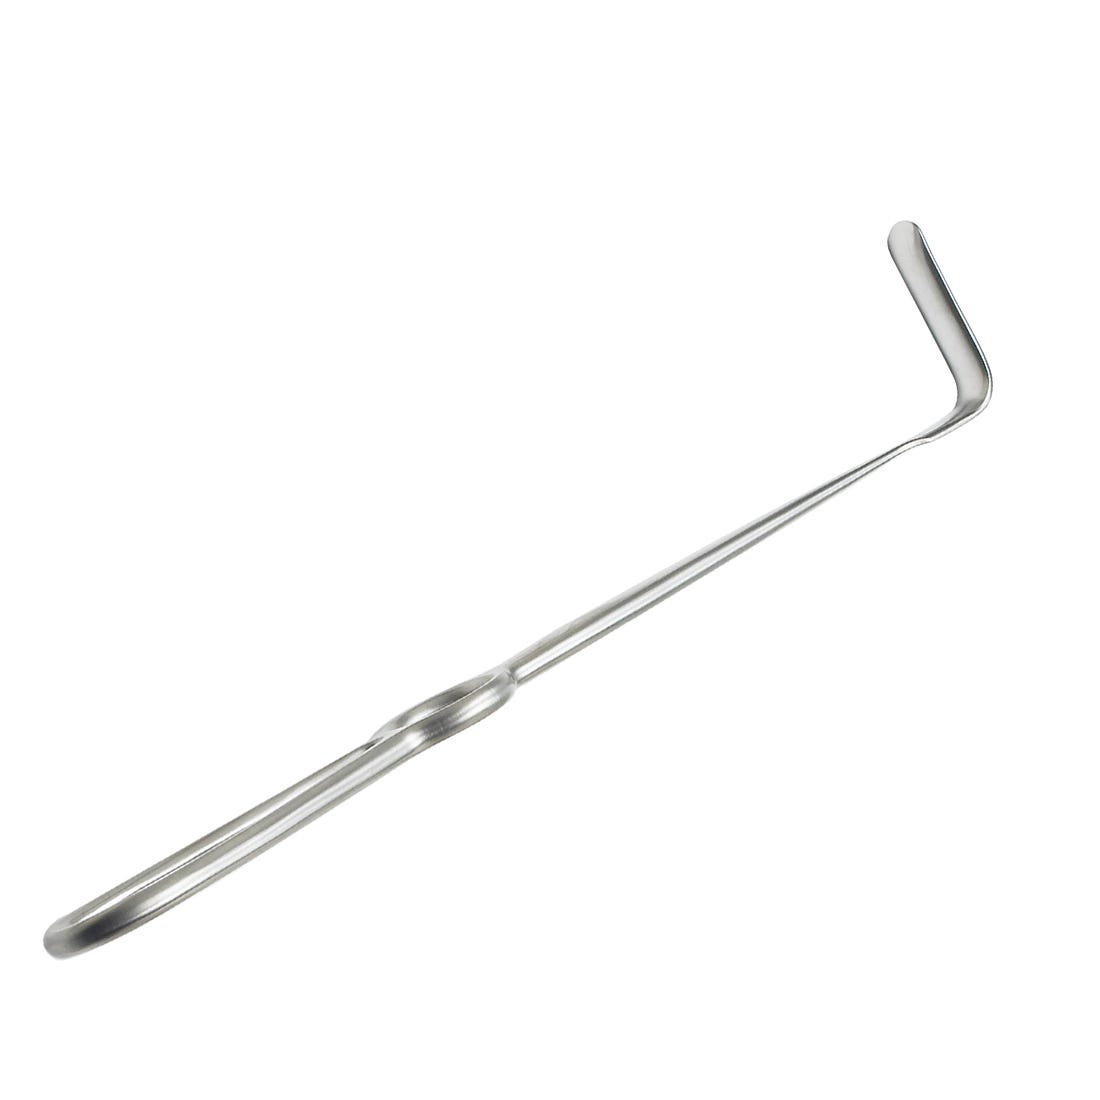 Obwegeser Type Surgical Retractor Concave, Curved Up, 10mm x 35mm